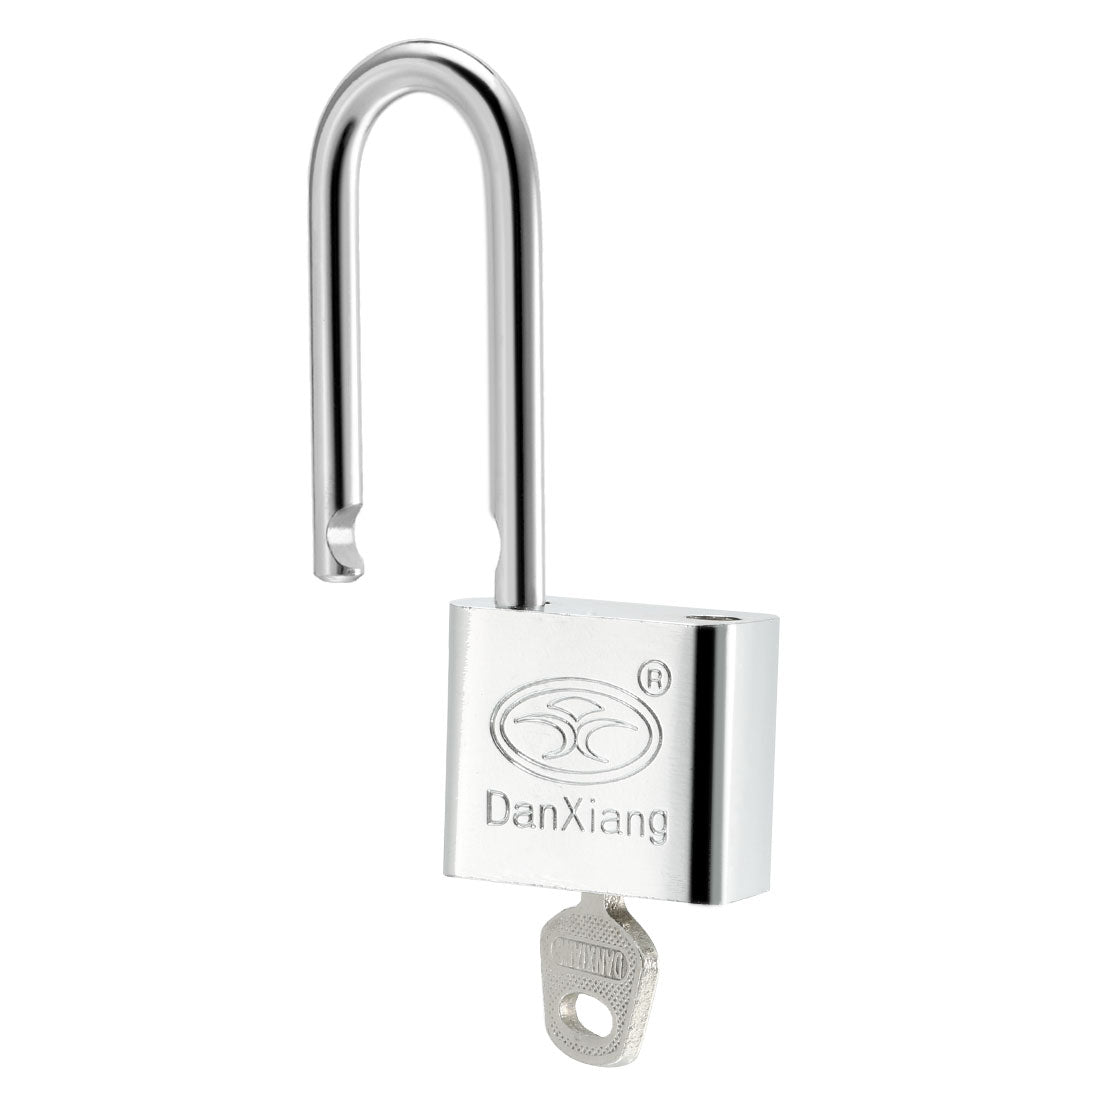 uxcell Uxcell 30mm Body Wide Stainless Steel Padlock Chrome Finish Harden Long Shackle, Keyed Different